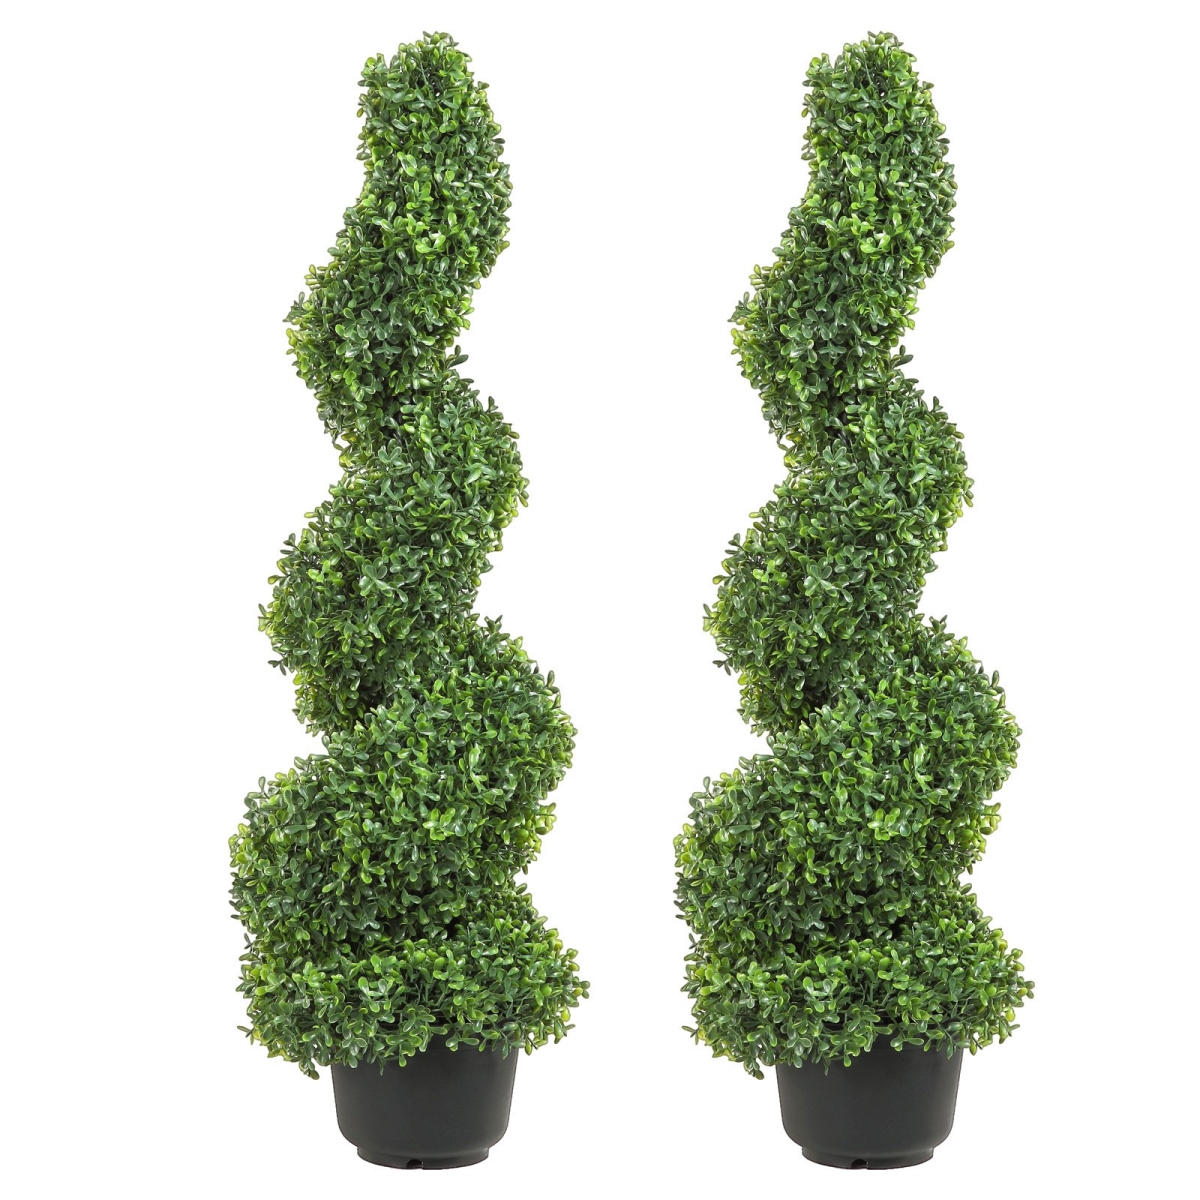 Picture of Vevor HYMRGXJS36YCLY992V0 Artificial Topiaries Boxwood Trees Green Artificial Boxwood Topiaries Within Containers - 2 Piece